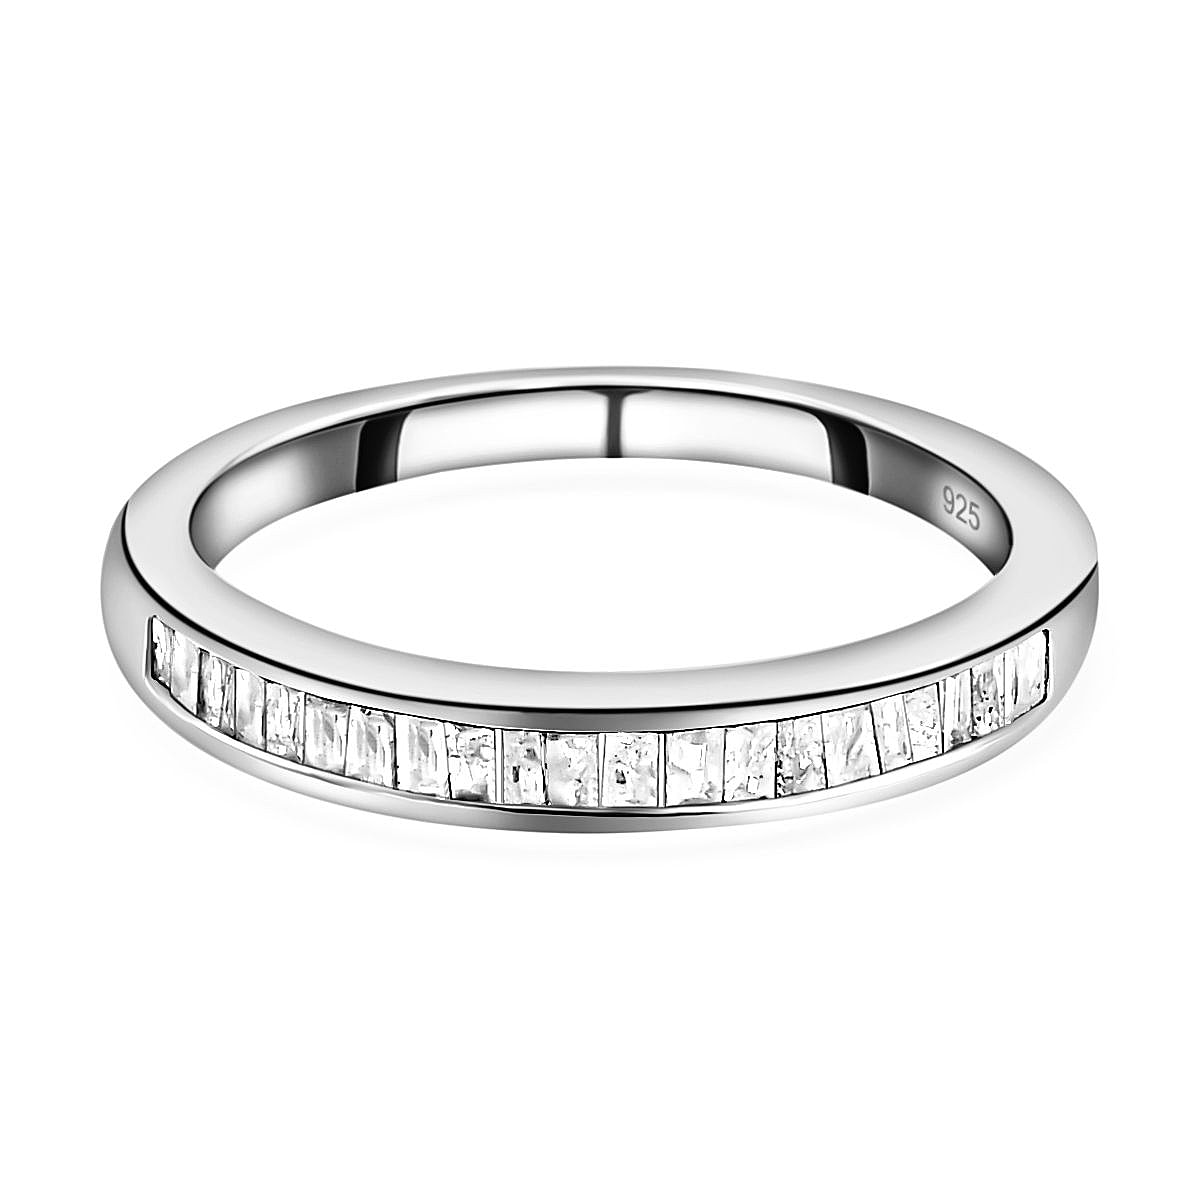 0.25 Ct Diamond Half Eternity Wedding Band Ring in Platinum Plated Sterling Silver